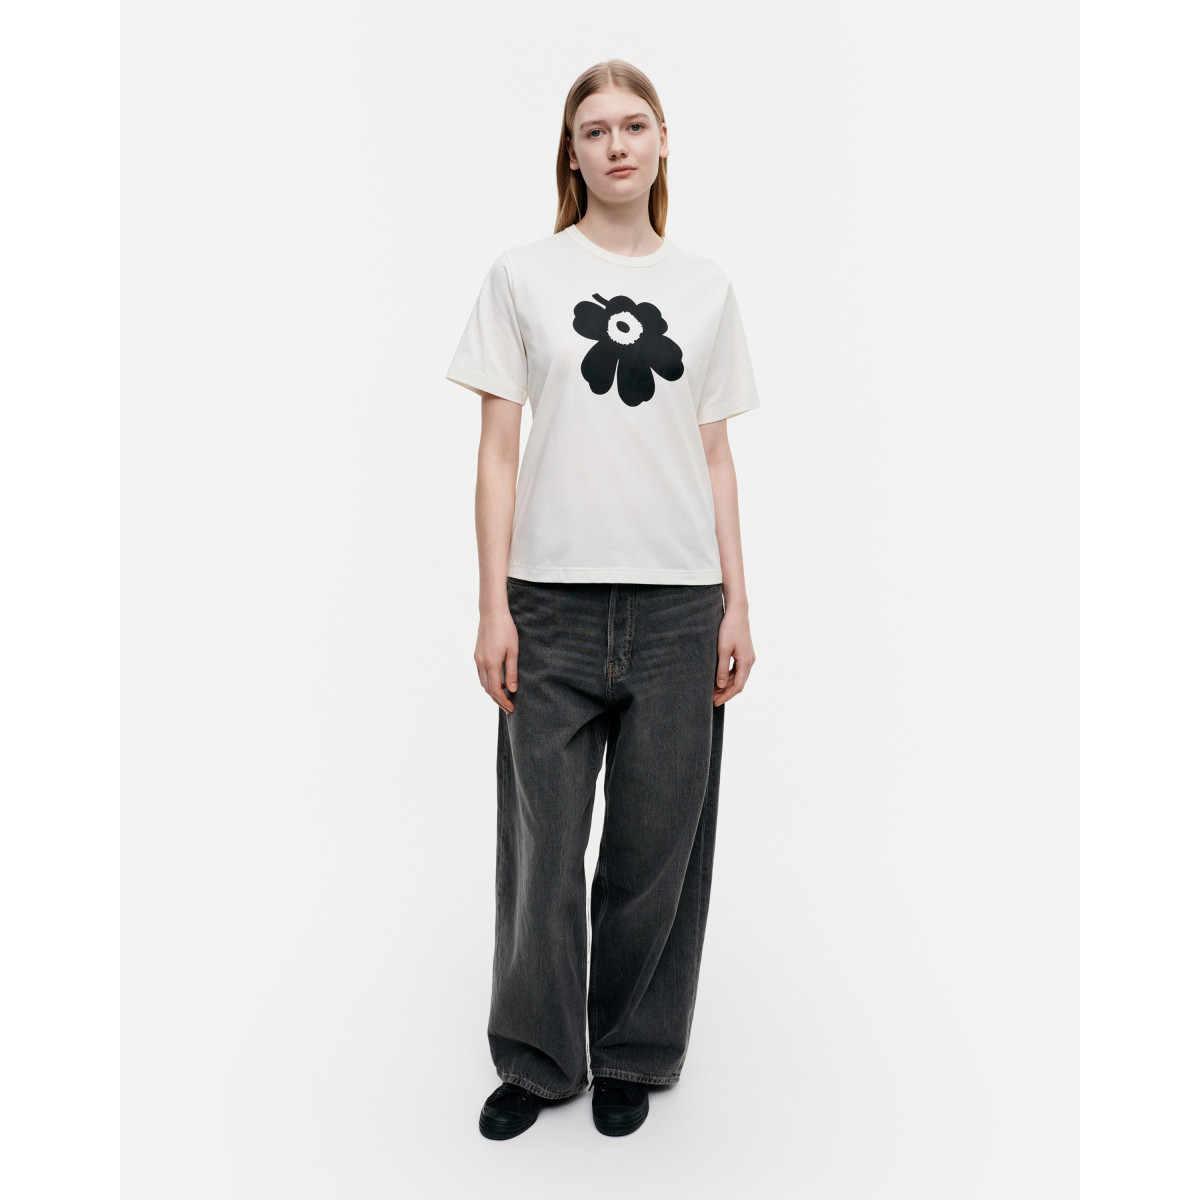 Erna Relaxed Unikko Placement t-shirt 190